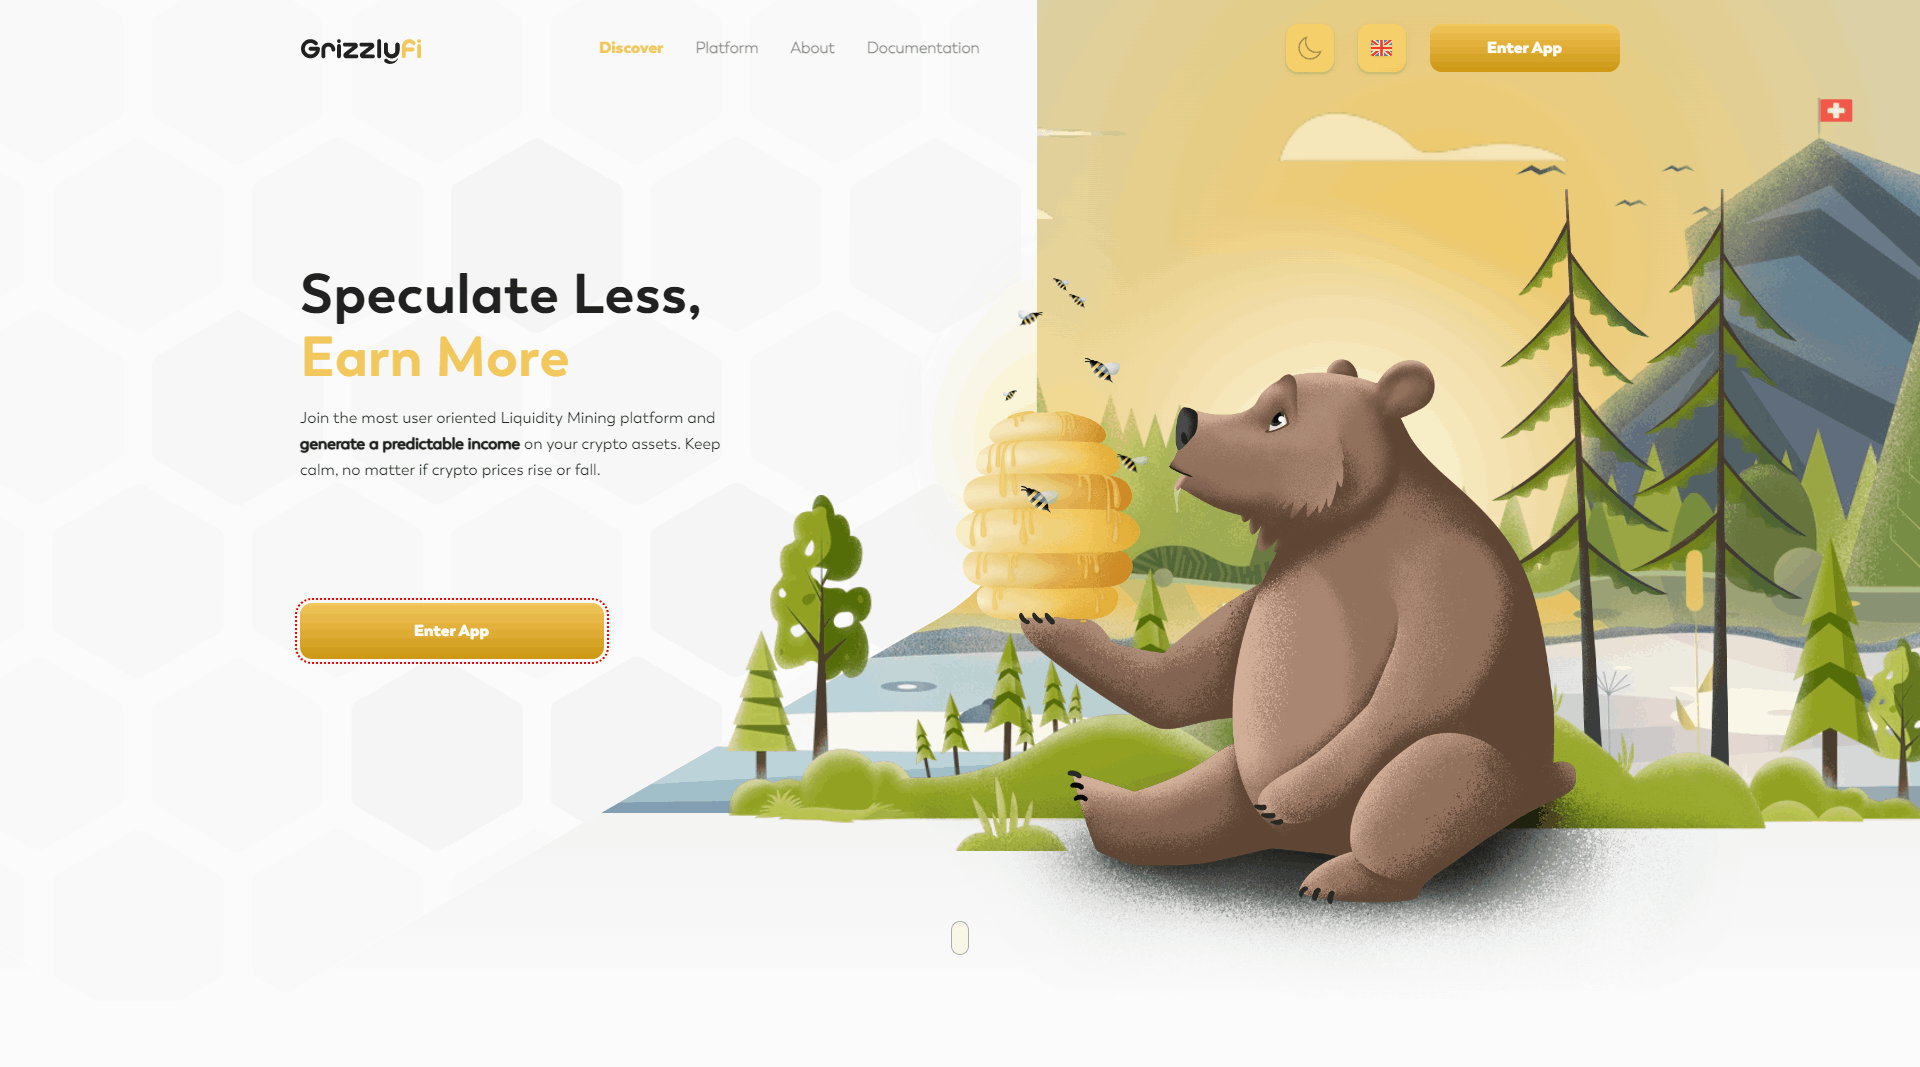 Grizzly App